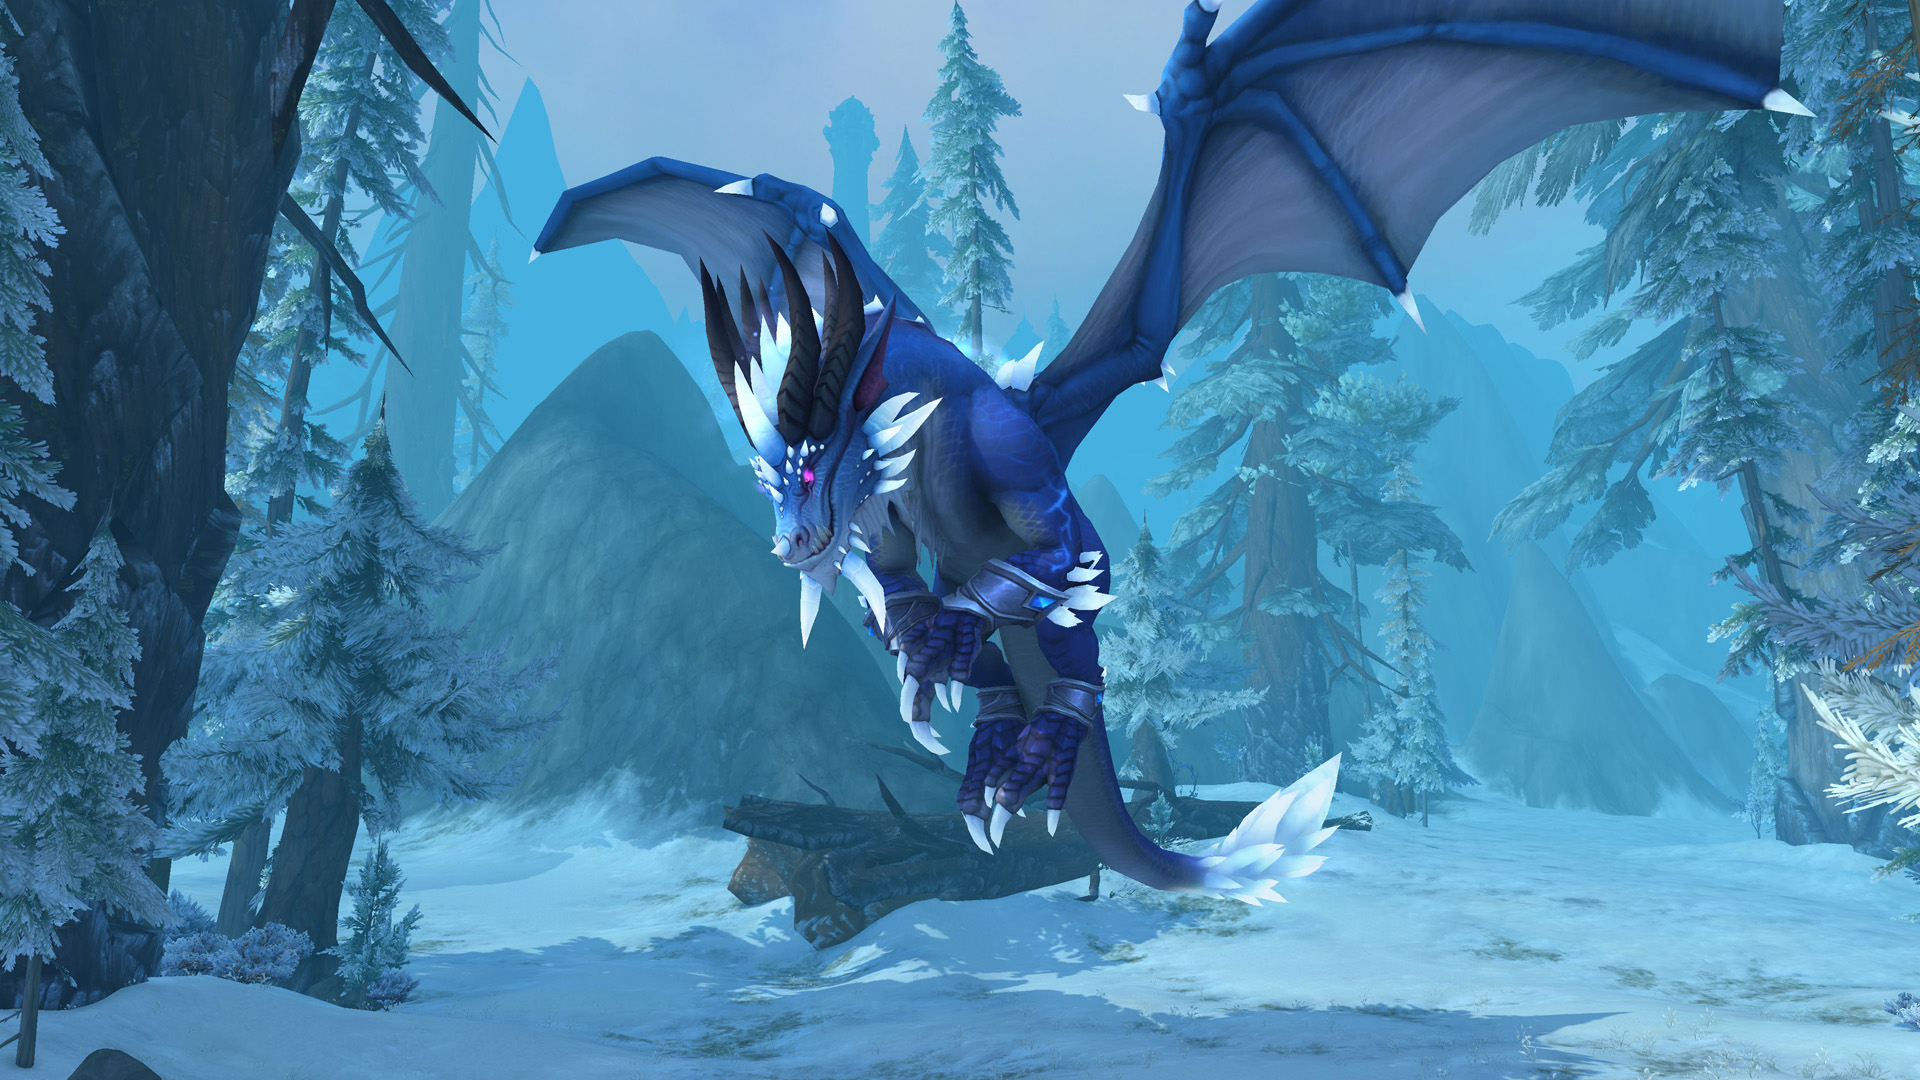 A dragon from World of Warcraft’s Dragonflight expansion